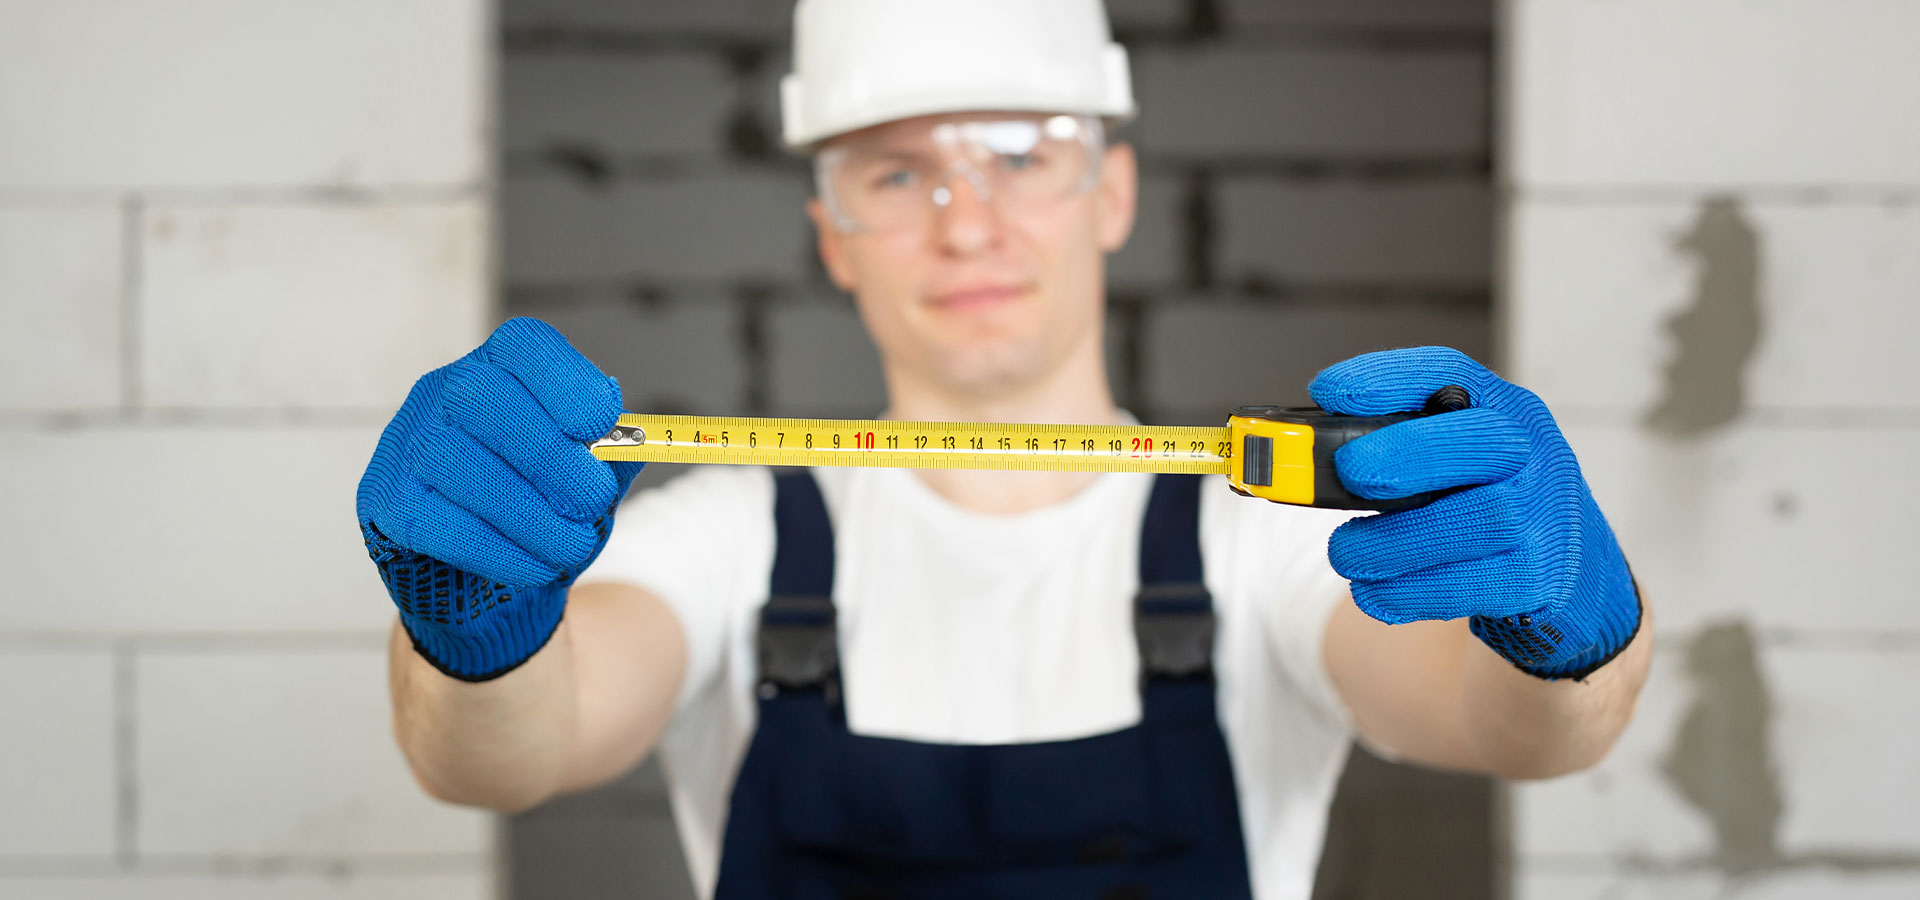 Introducing Our New “How to Read a Measuring Tape and Units of Measurements” Training Course